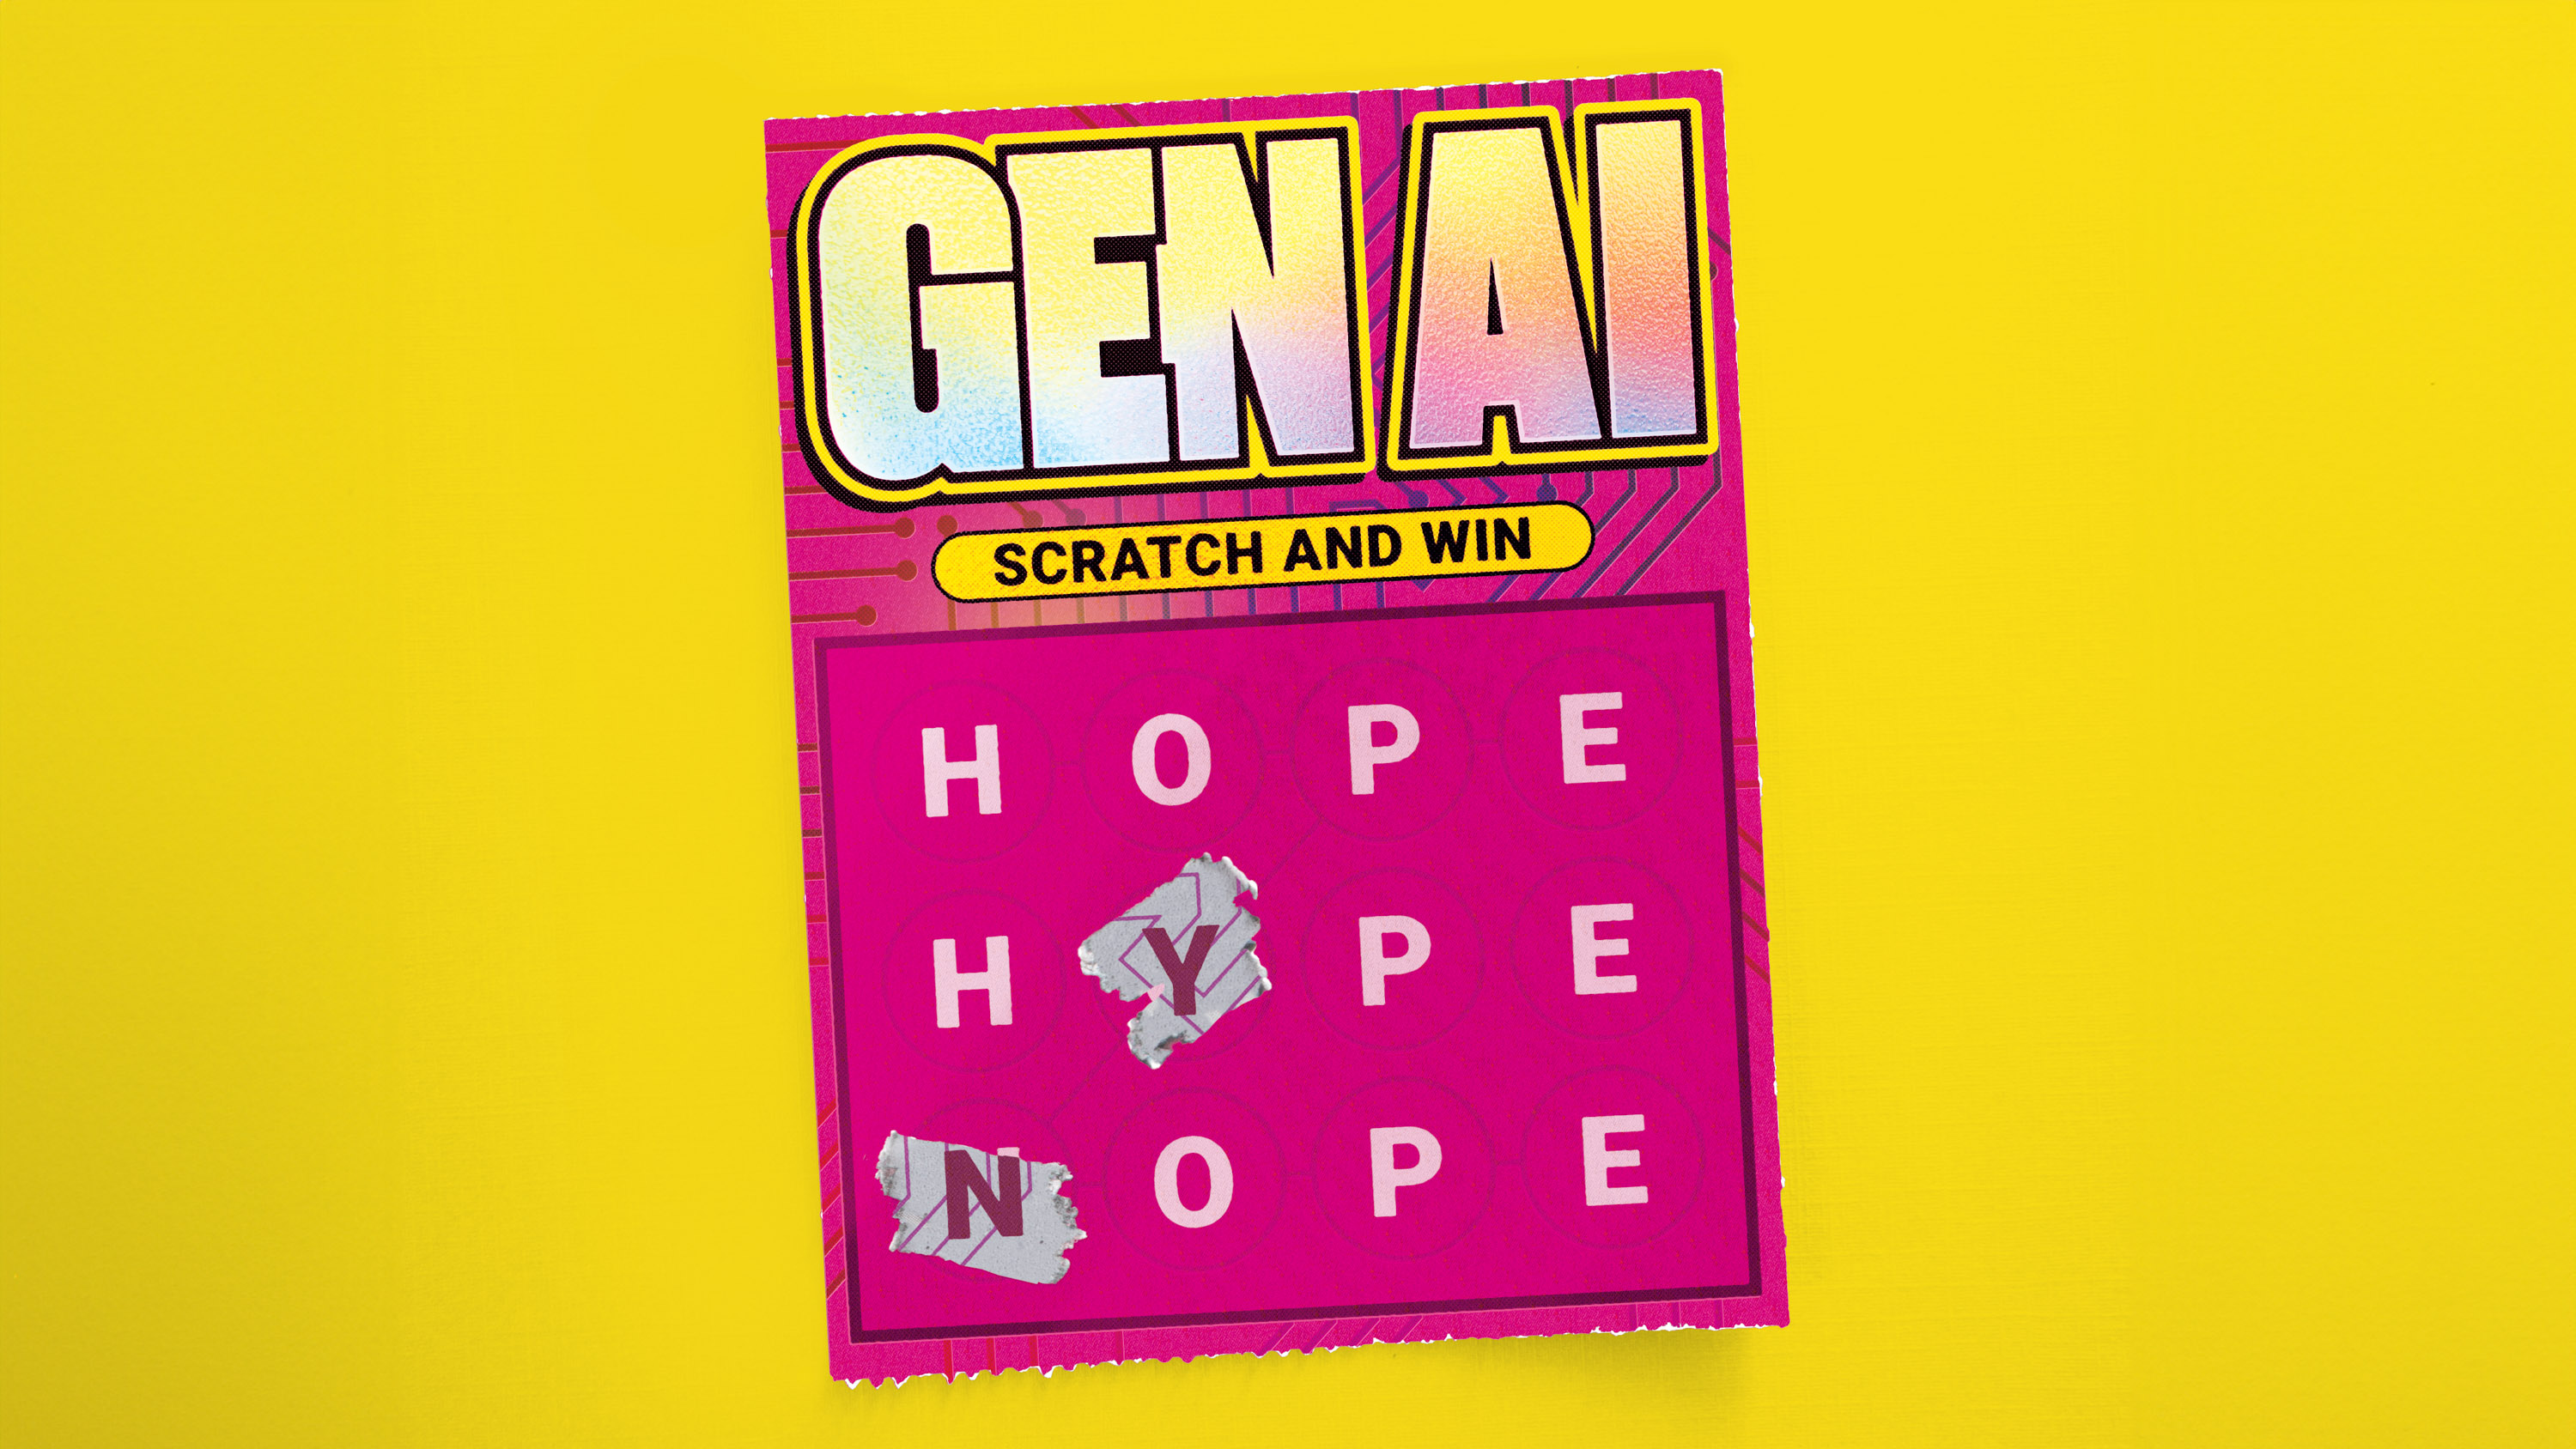 a "Gen AI" scratch ticket with "HOPE" "HYPE" and "NOPE" revealed